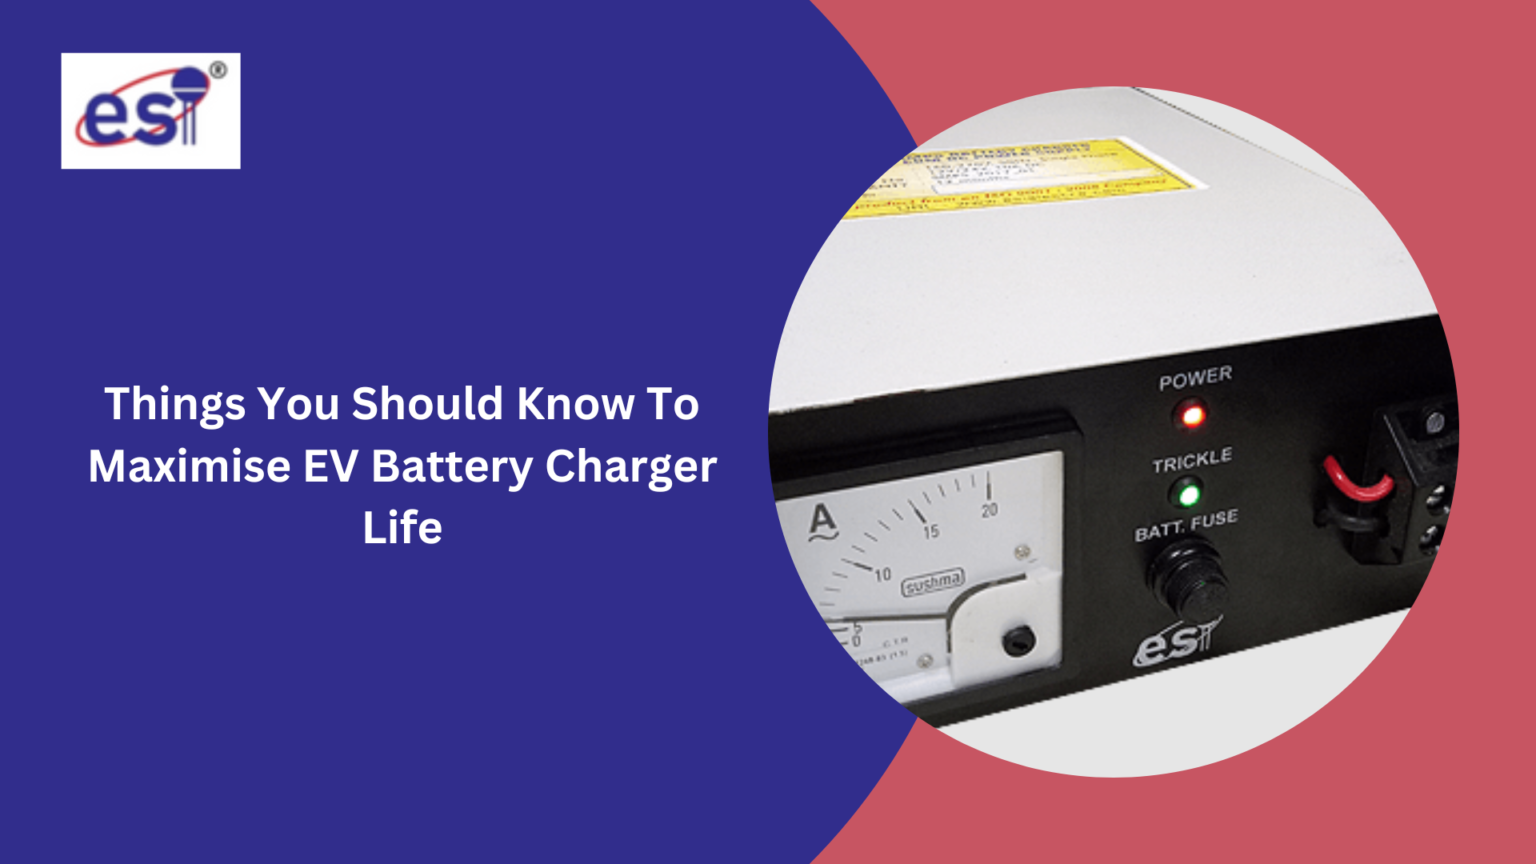 Things You Should Know To Maximise EV Battery Charger Life